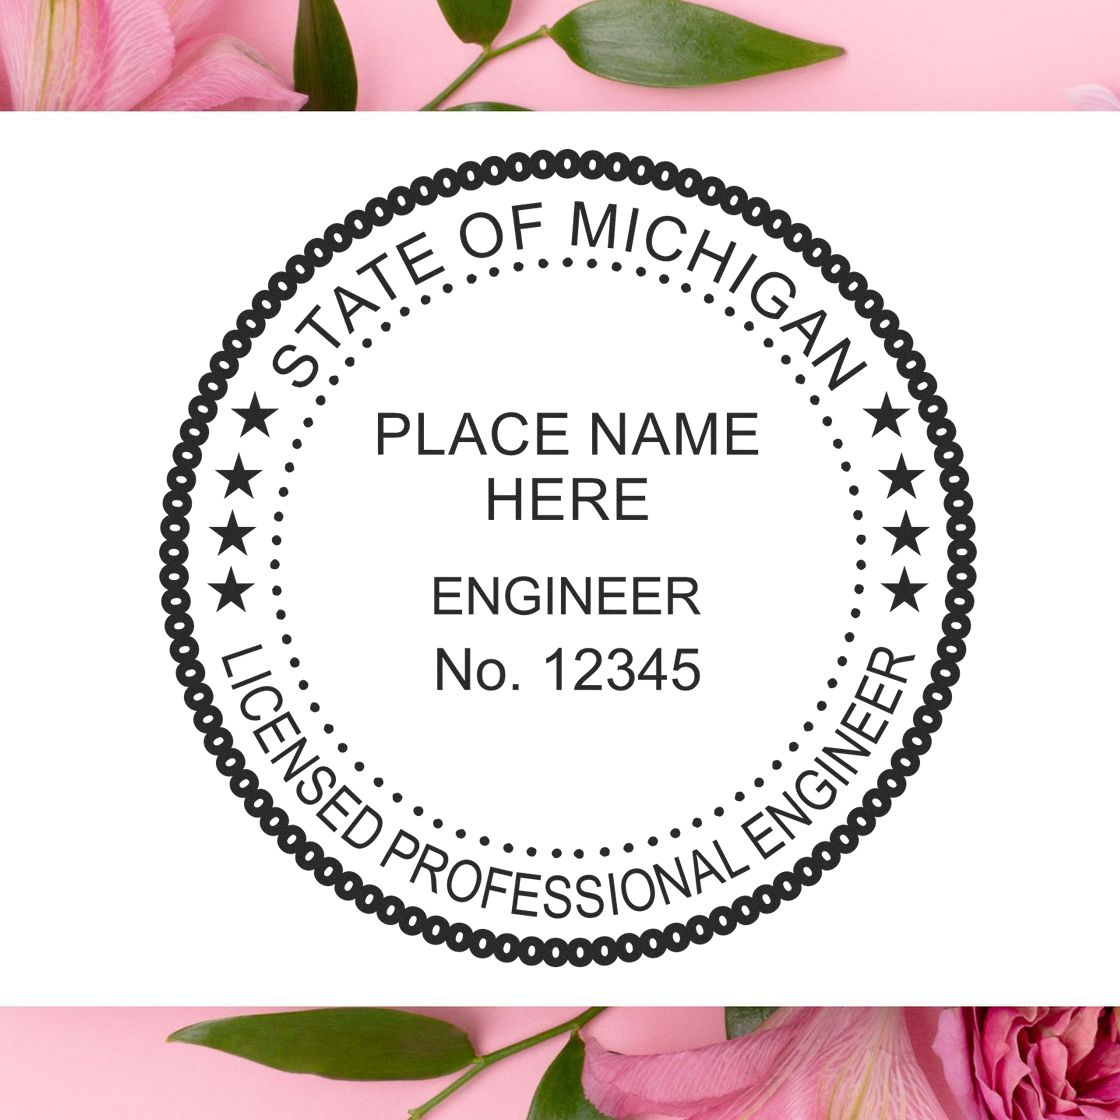 Another Example of a stamped impression of the Michigan Professional Engineer Seal Stamp on a piece of office paper.